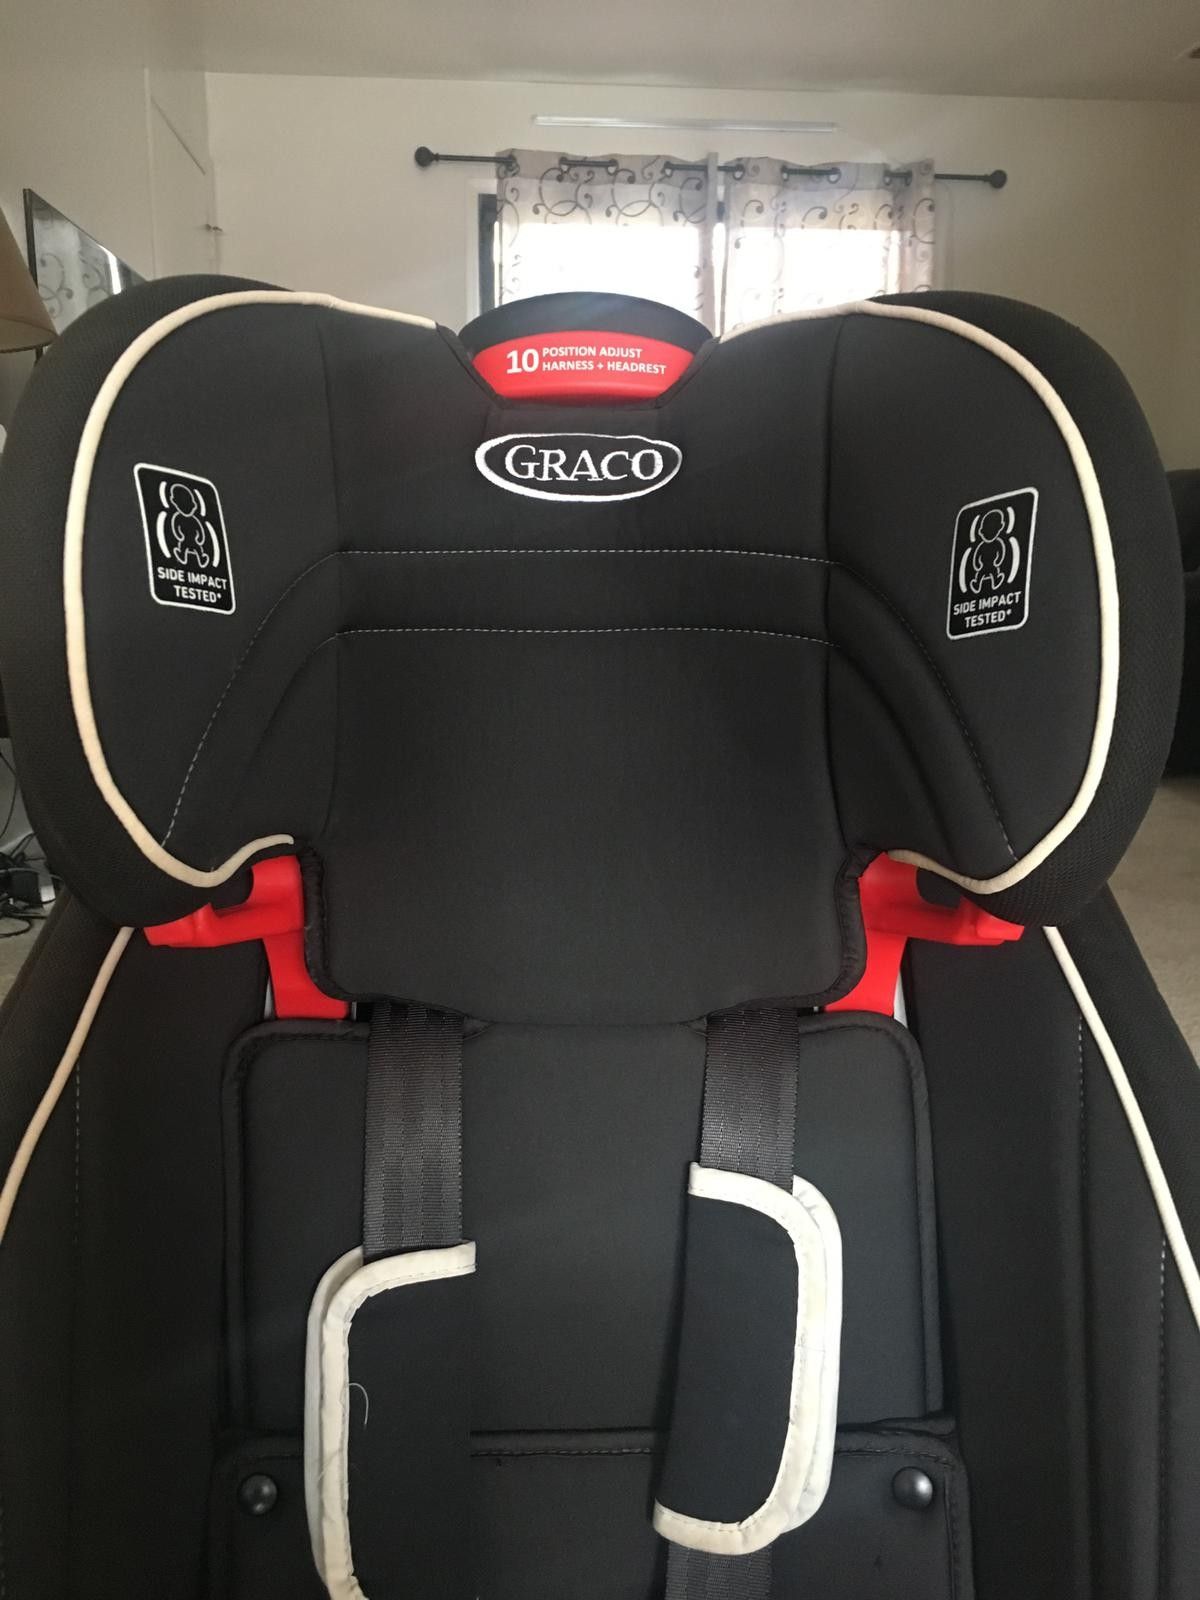 Graco 3 in1 harness booster car seat